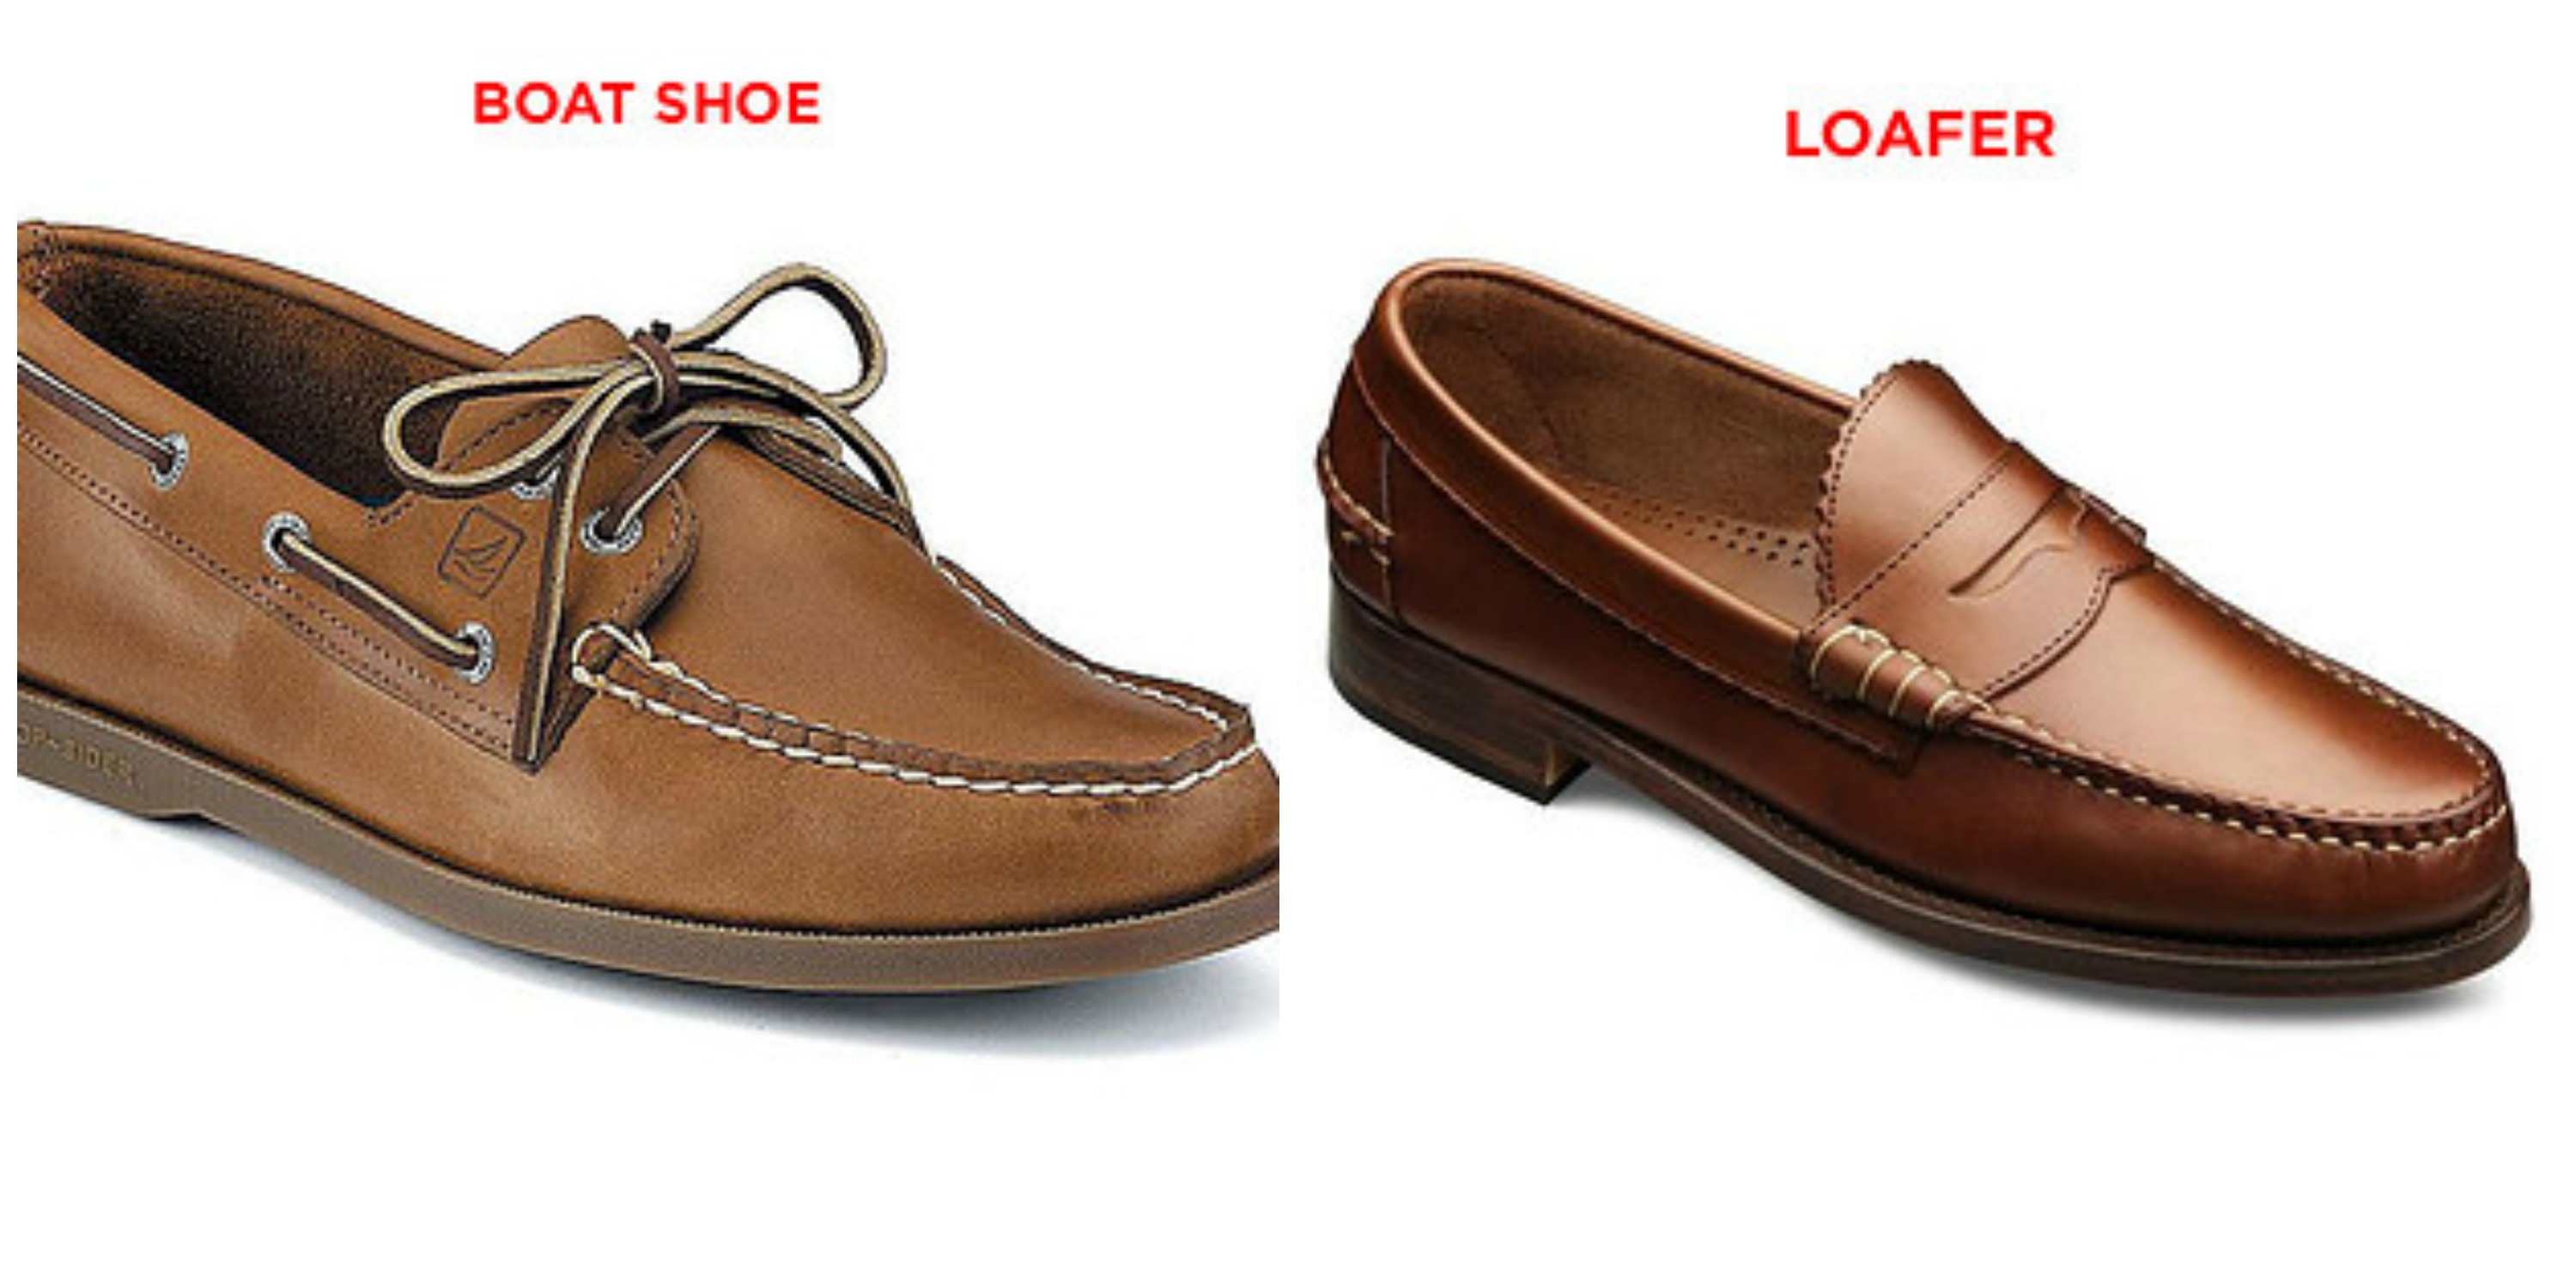 Boat shoes instead of loafers